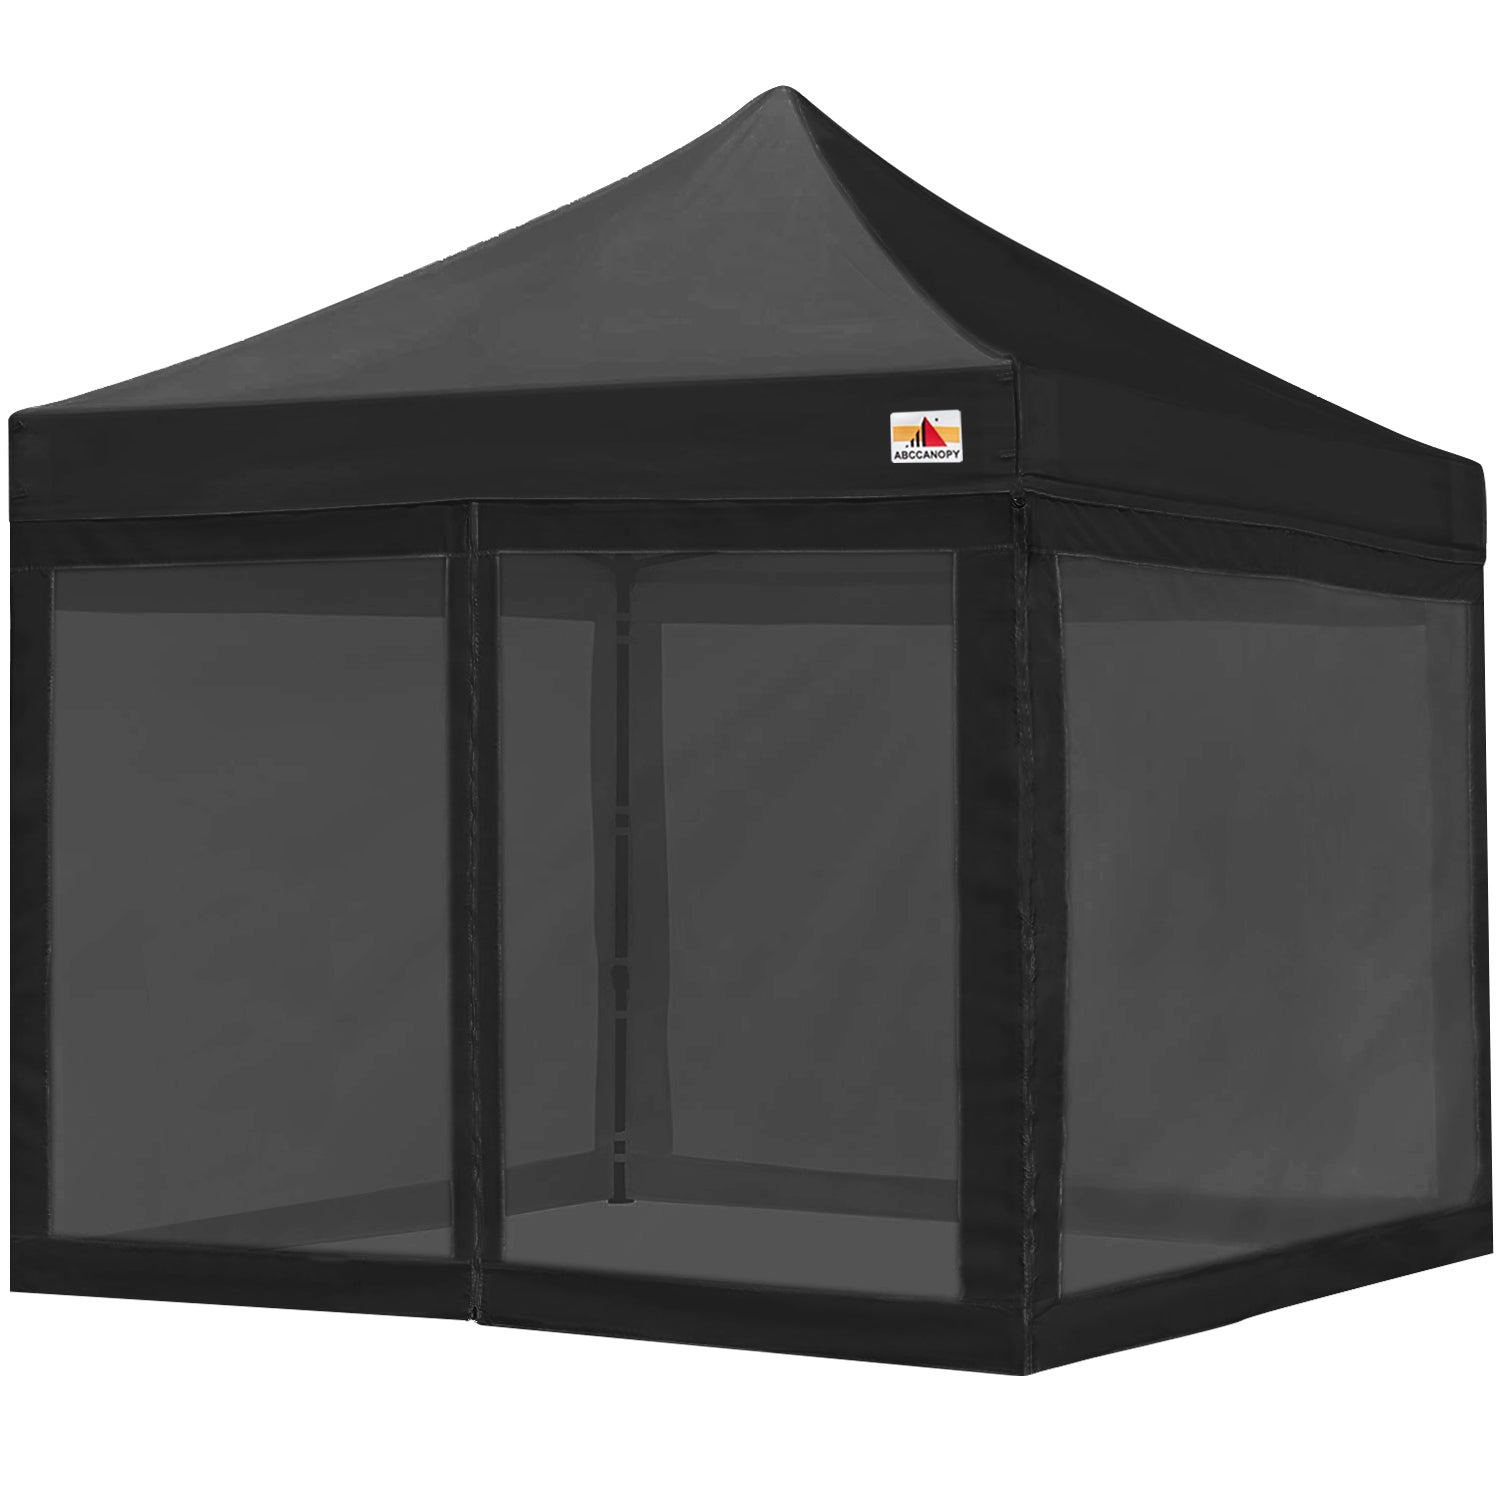 Mesh Sidewalls for 10' x 10' Pop-Up Tent Canopy